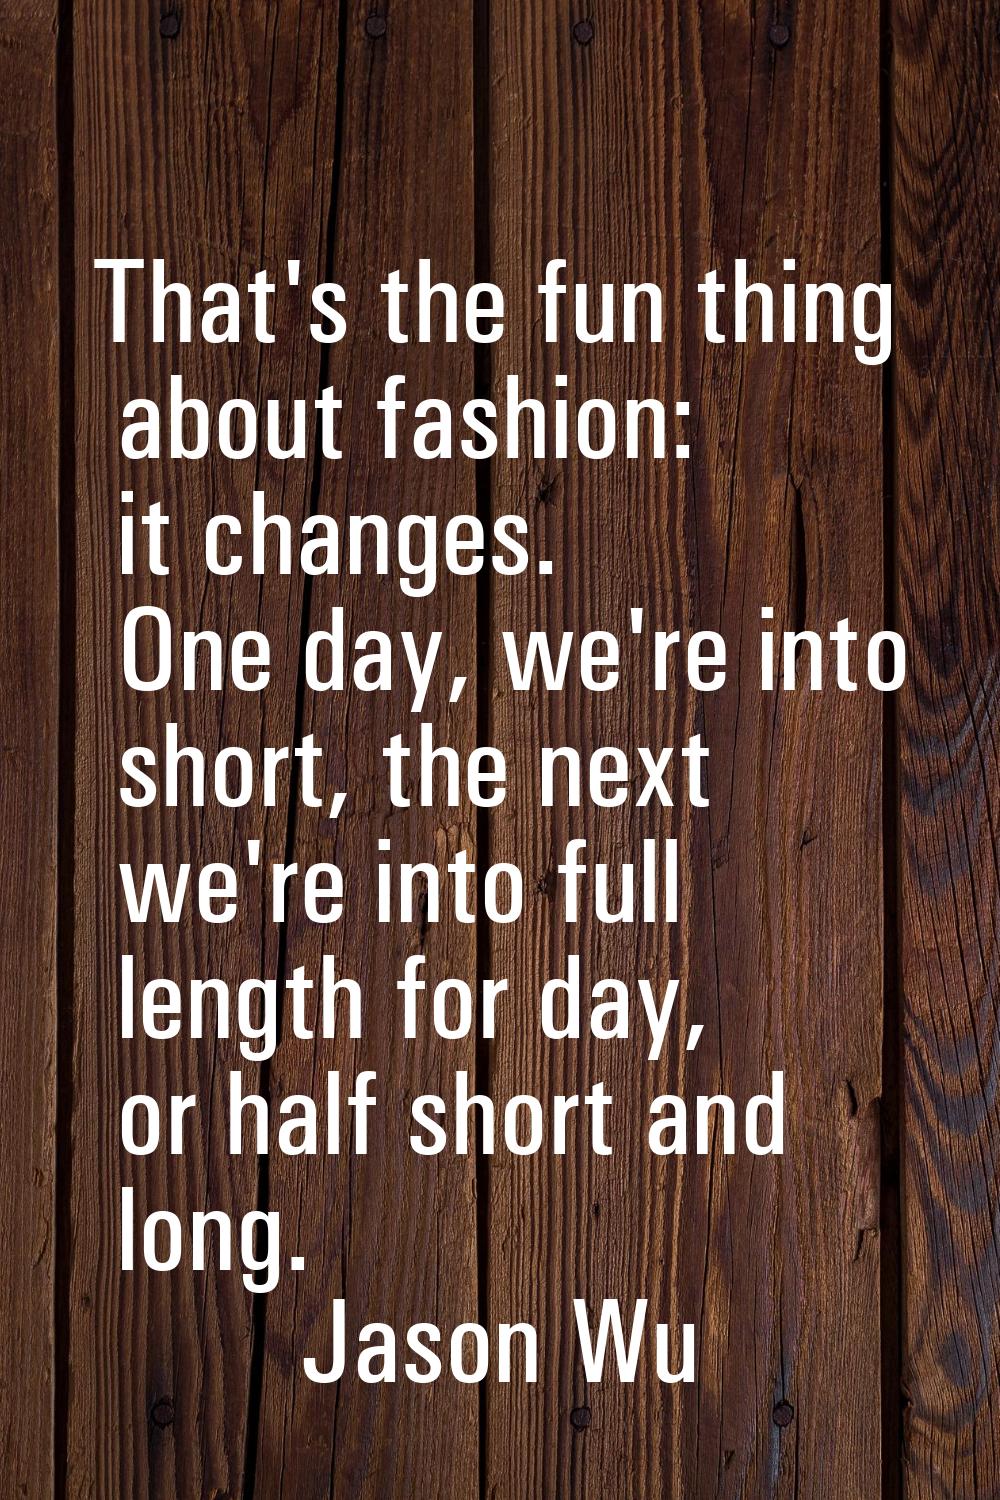 That's the fun thing about fashion: it changes. One day, we're into short, the next we're into full